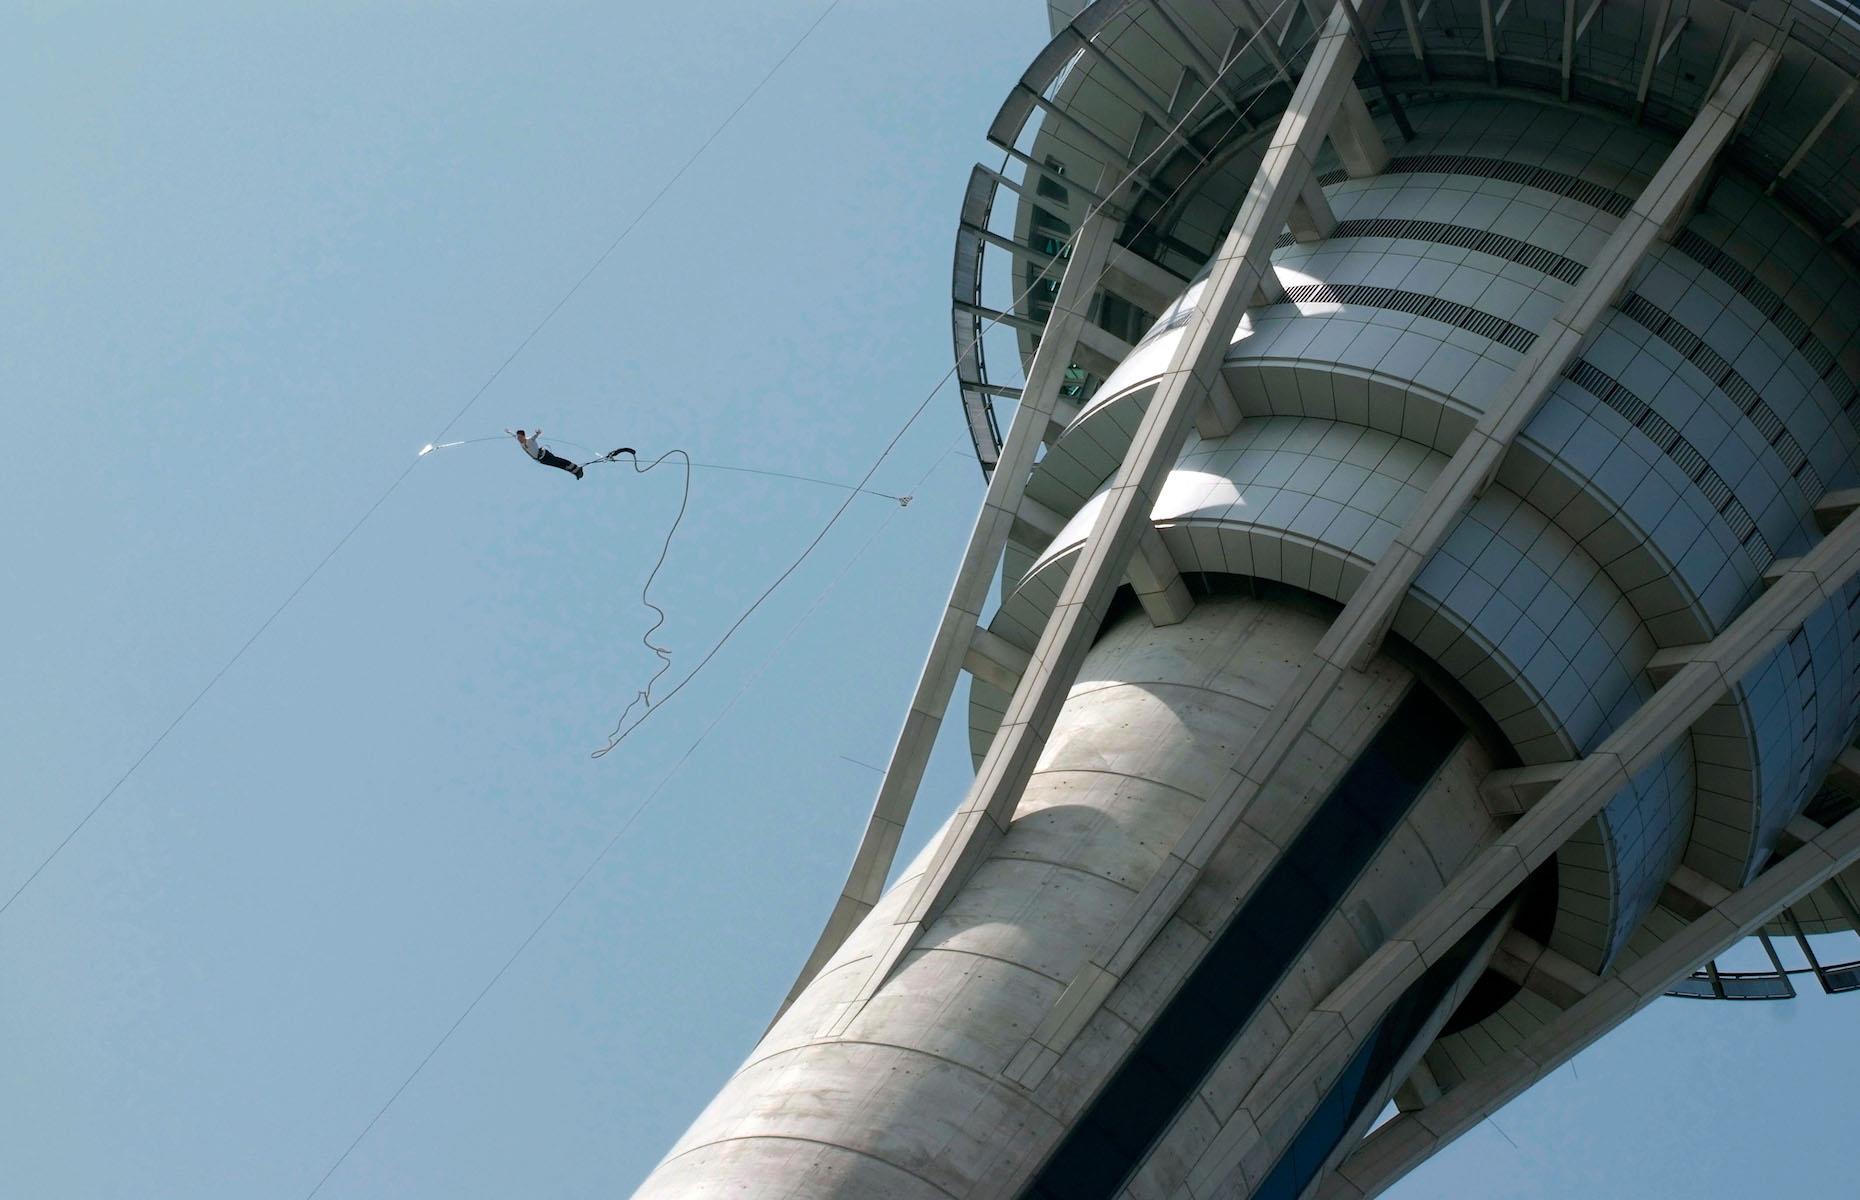 <p>Got a serious head for heights and an adrenalin craving? Make for the Macau Tower and push yourself to the limit on its record-making bungee jump – it's the world's highest from a commercial building, according to the<em> Guinness Book of Records</em>. The brainchild of New Zealand extreme sport pioneer AJ Hackett, Skypark Macau Tower’s bungee jump sees those who are game leap off a platform at a height of 764 feet (233m) from Macau's lofty tower. In winter you can even make the jump at night. After that, the landmark's other thrilling attractions – the skyjump, skywalk and tower climb – will barely get your heart racing. </p>